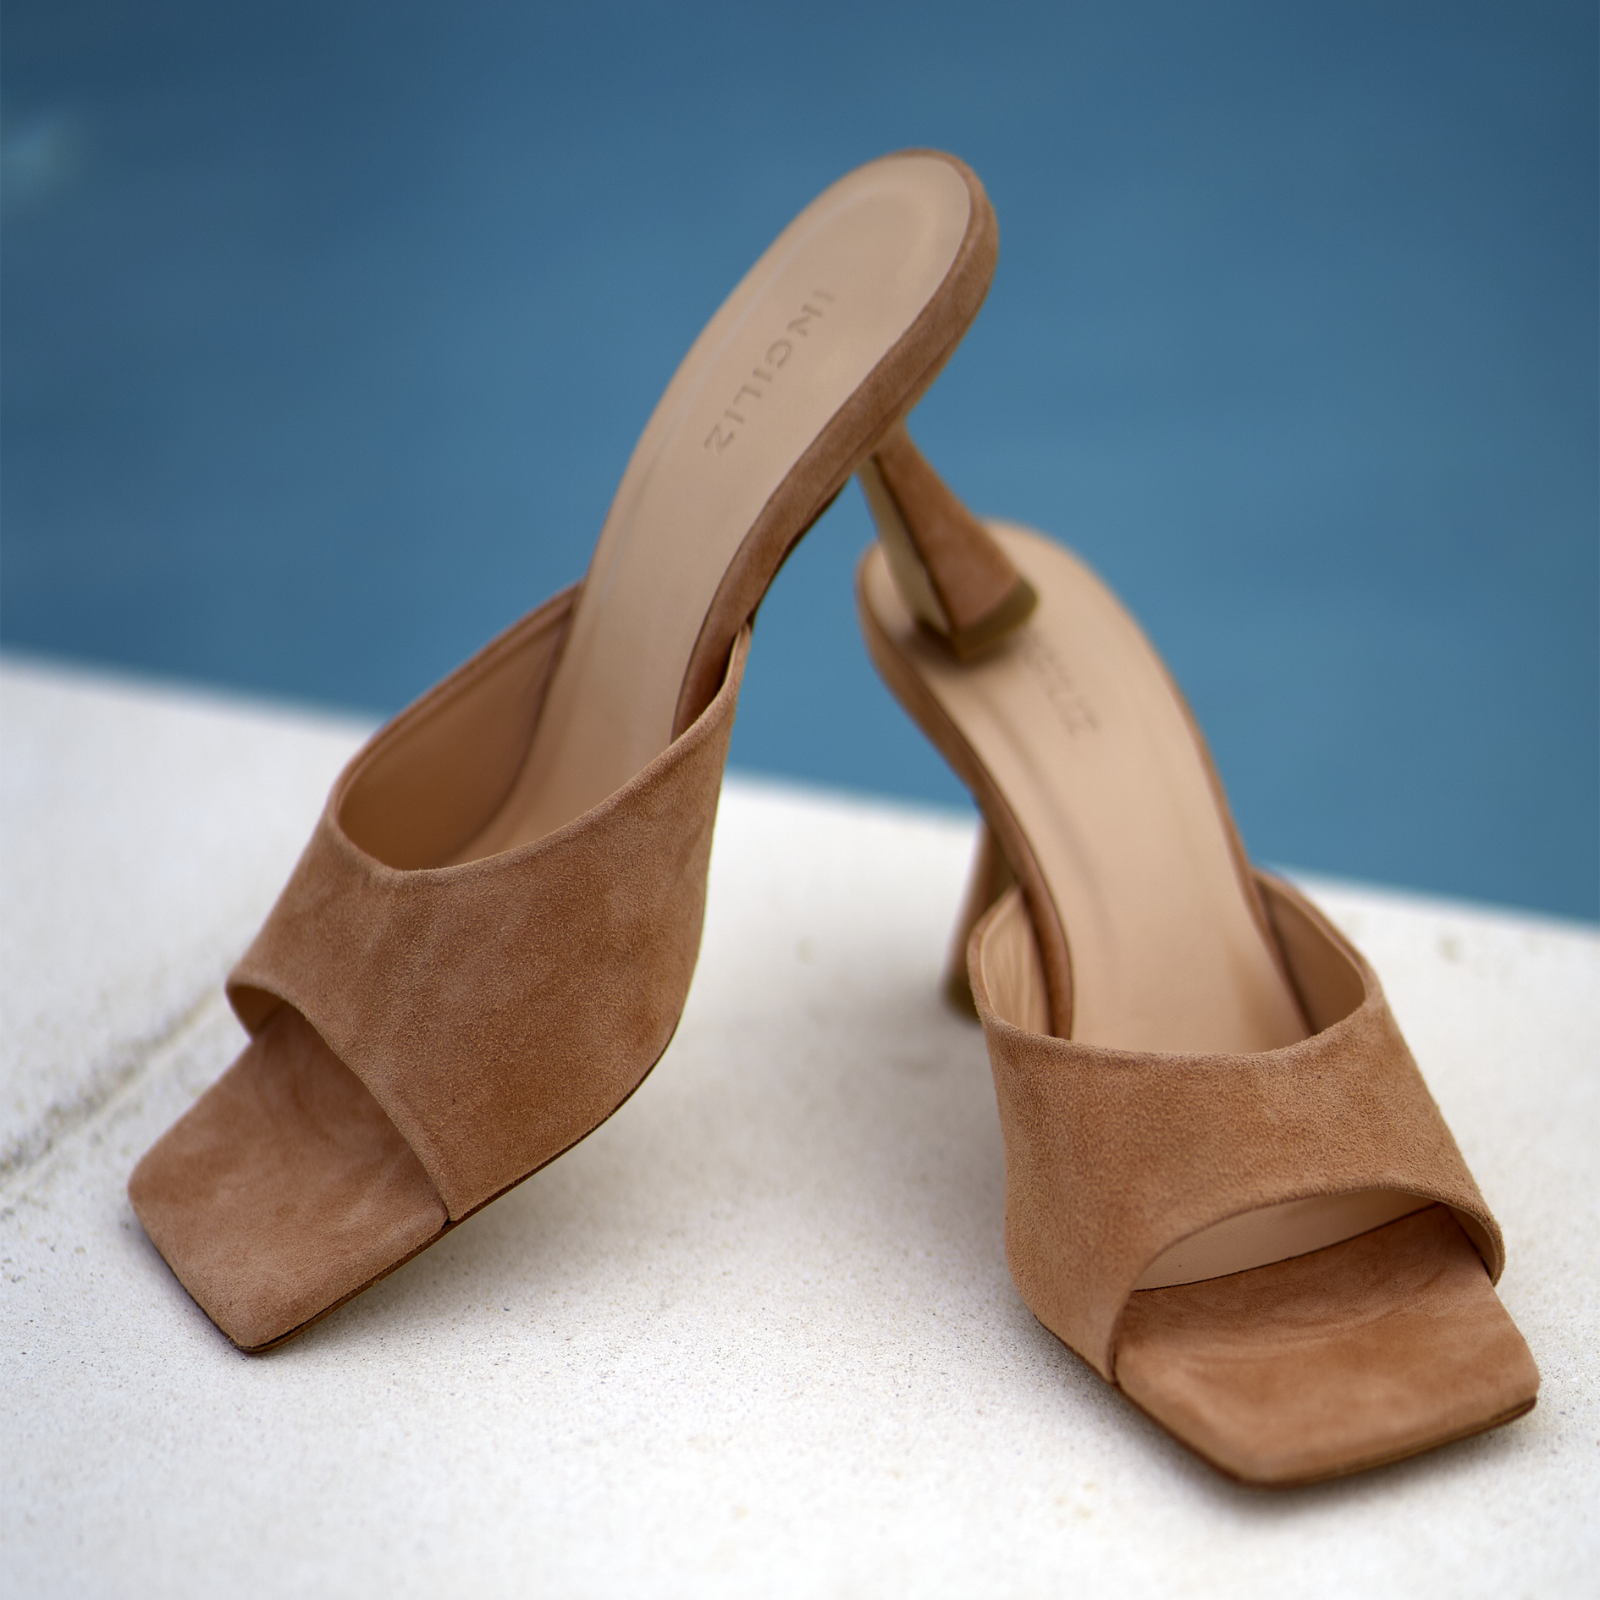 RENY BEIGE SUEDE LEATHER MULES